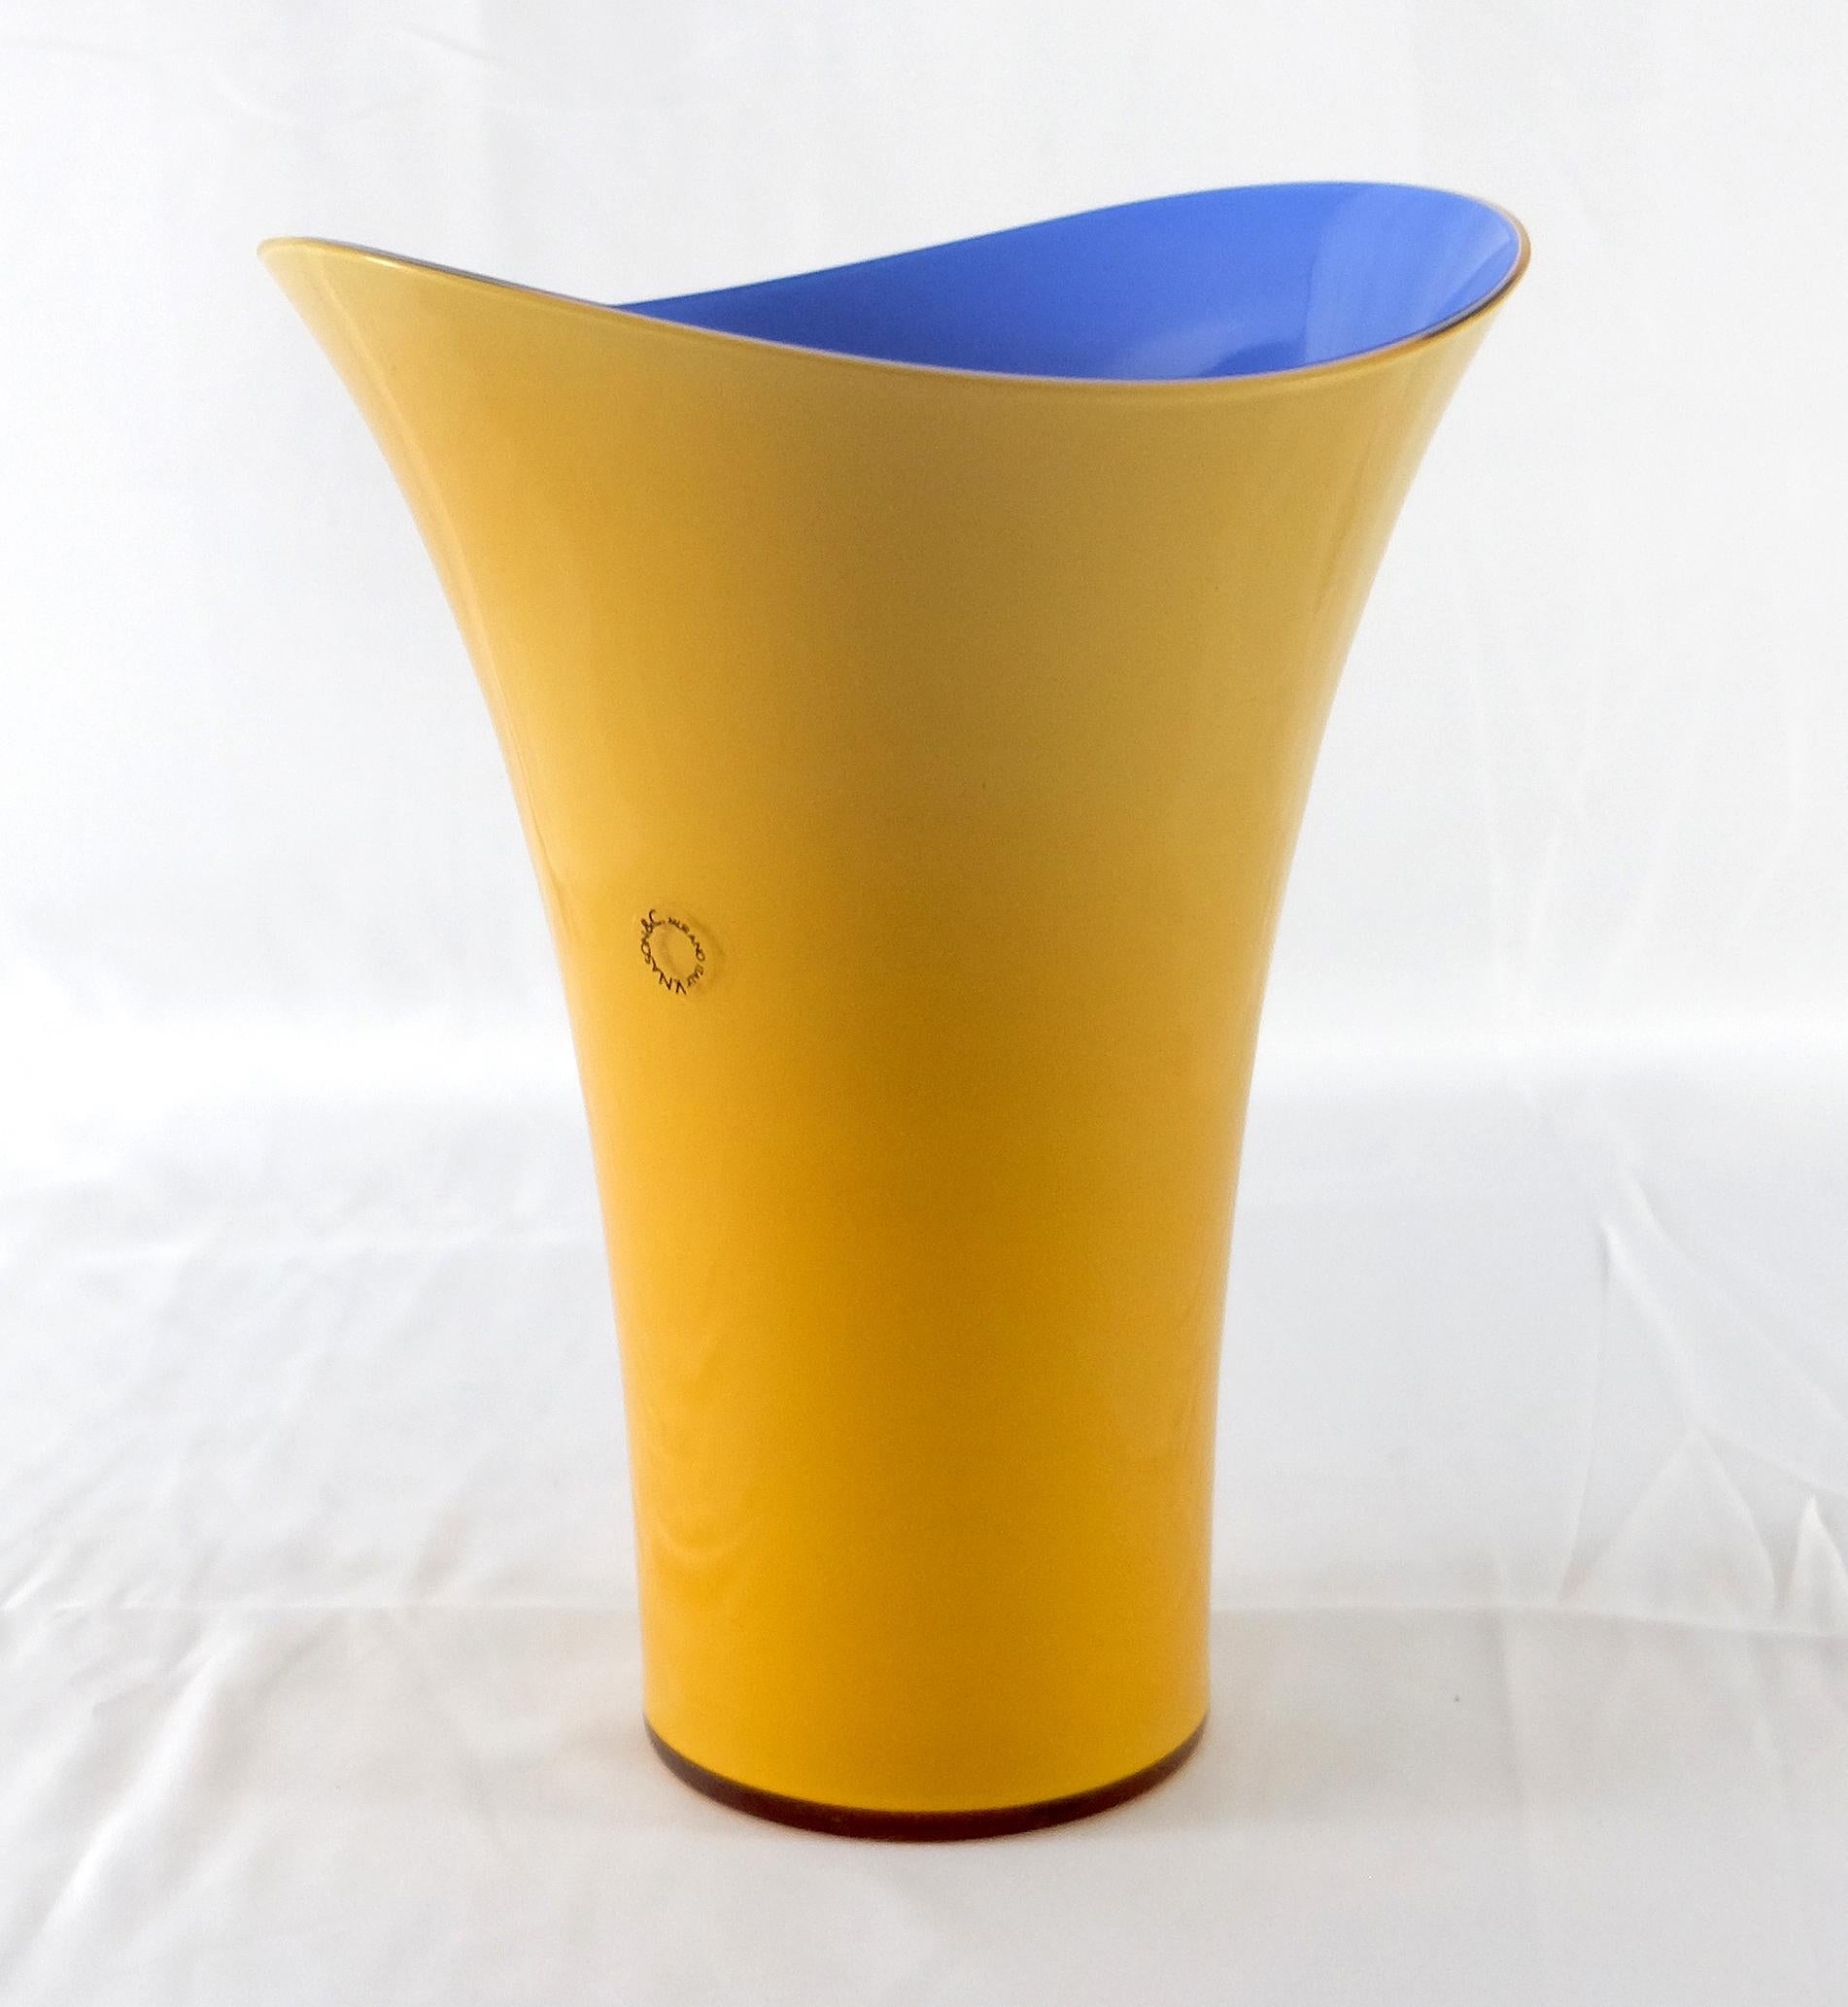 Offered for sale is a yellow & blue Asymmetric Murano Glass vase by V. Nason & C. of Italy. The vase is marked at the base and retains the original label. Vincenzo Nason established his glassworks, Vincenzo Nason & Cie (VNC) on the island of Murano,